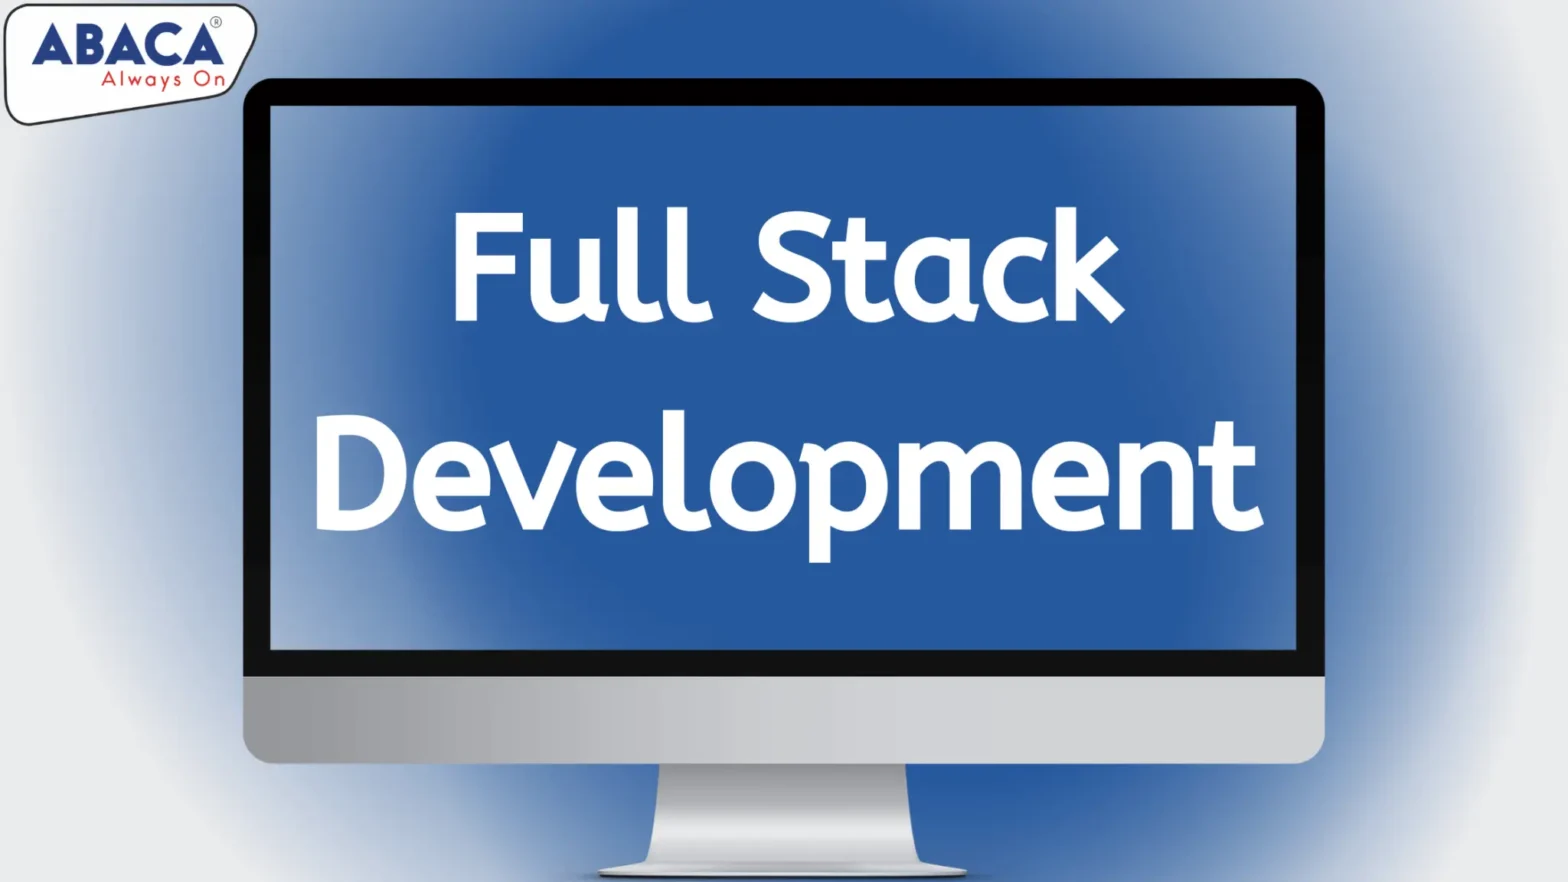 Here is the Ultimate Guide to Full Stack Development